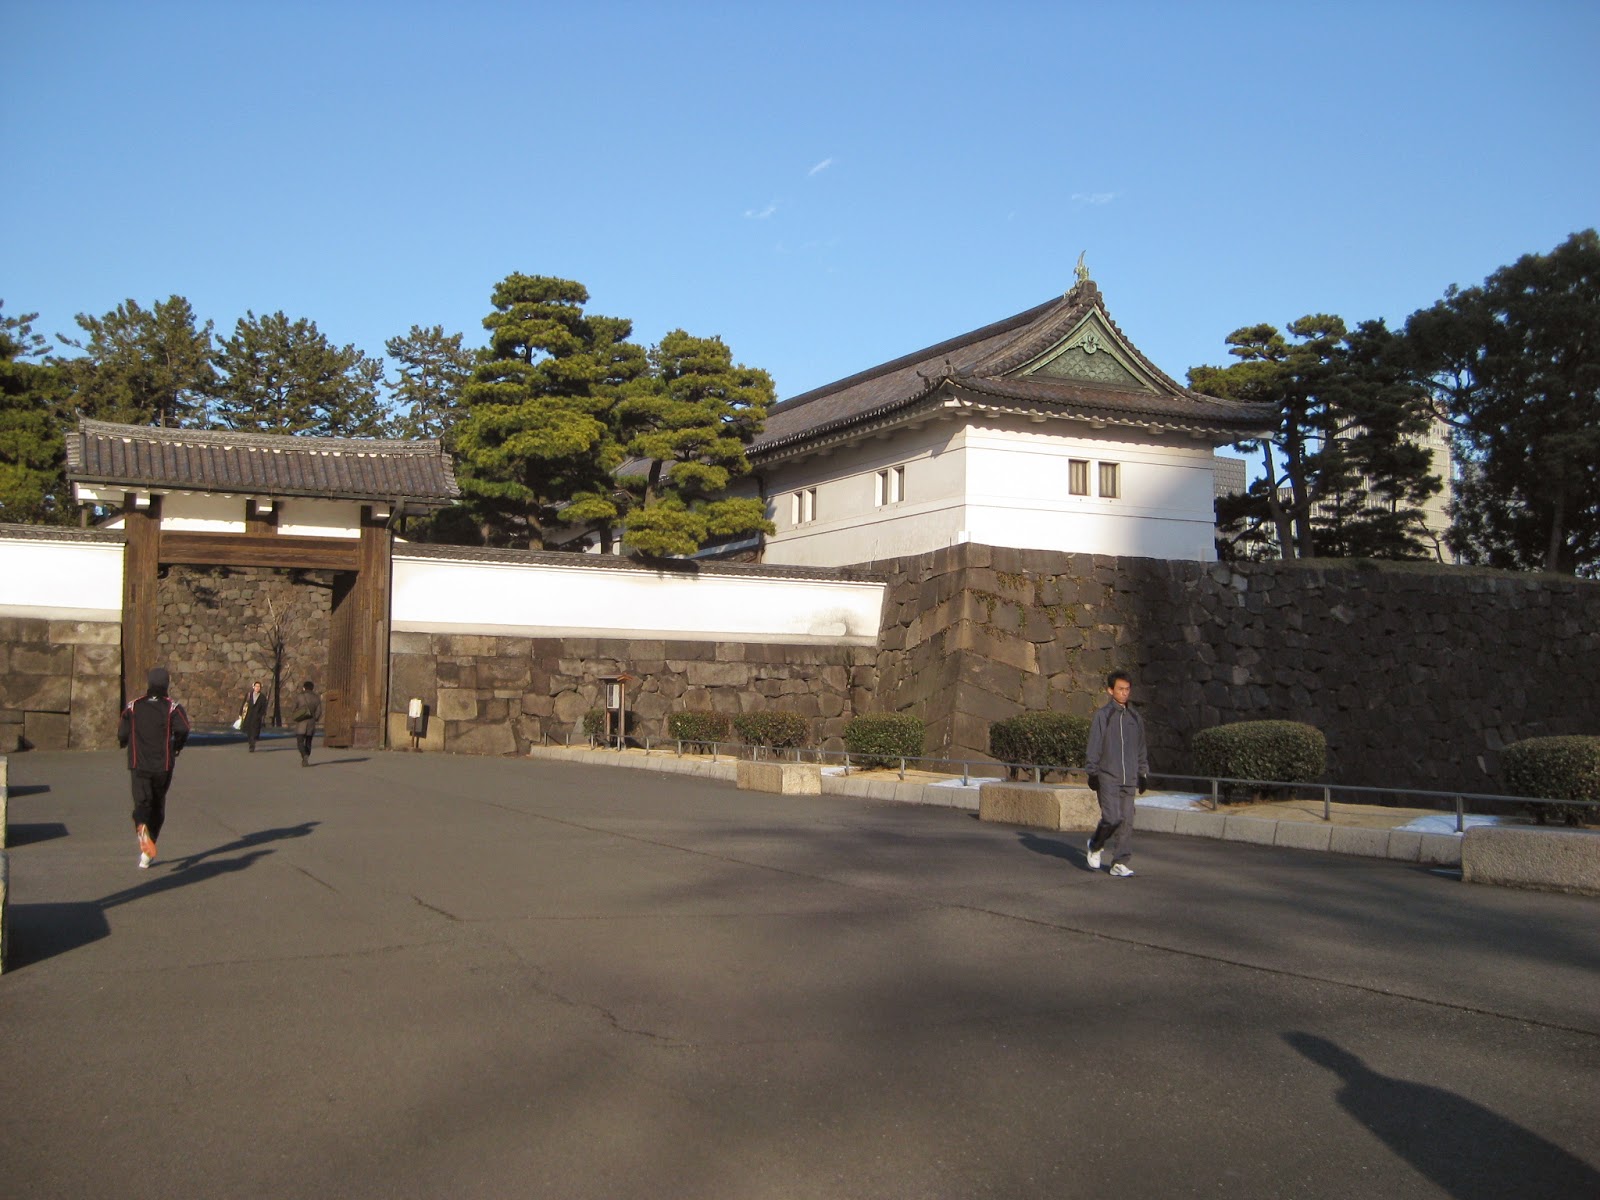 Tokyo - Imperial Palace